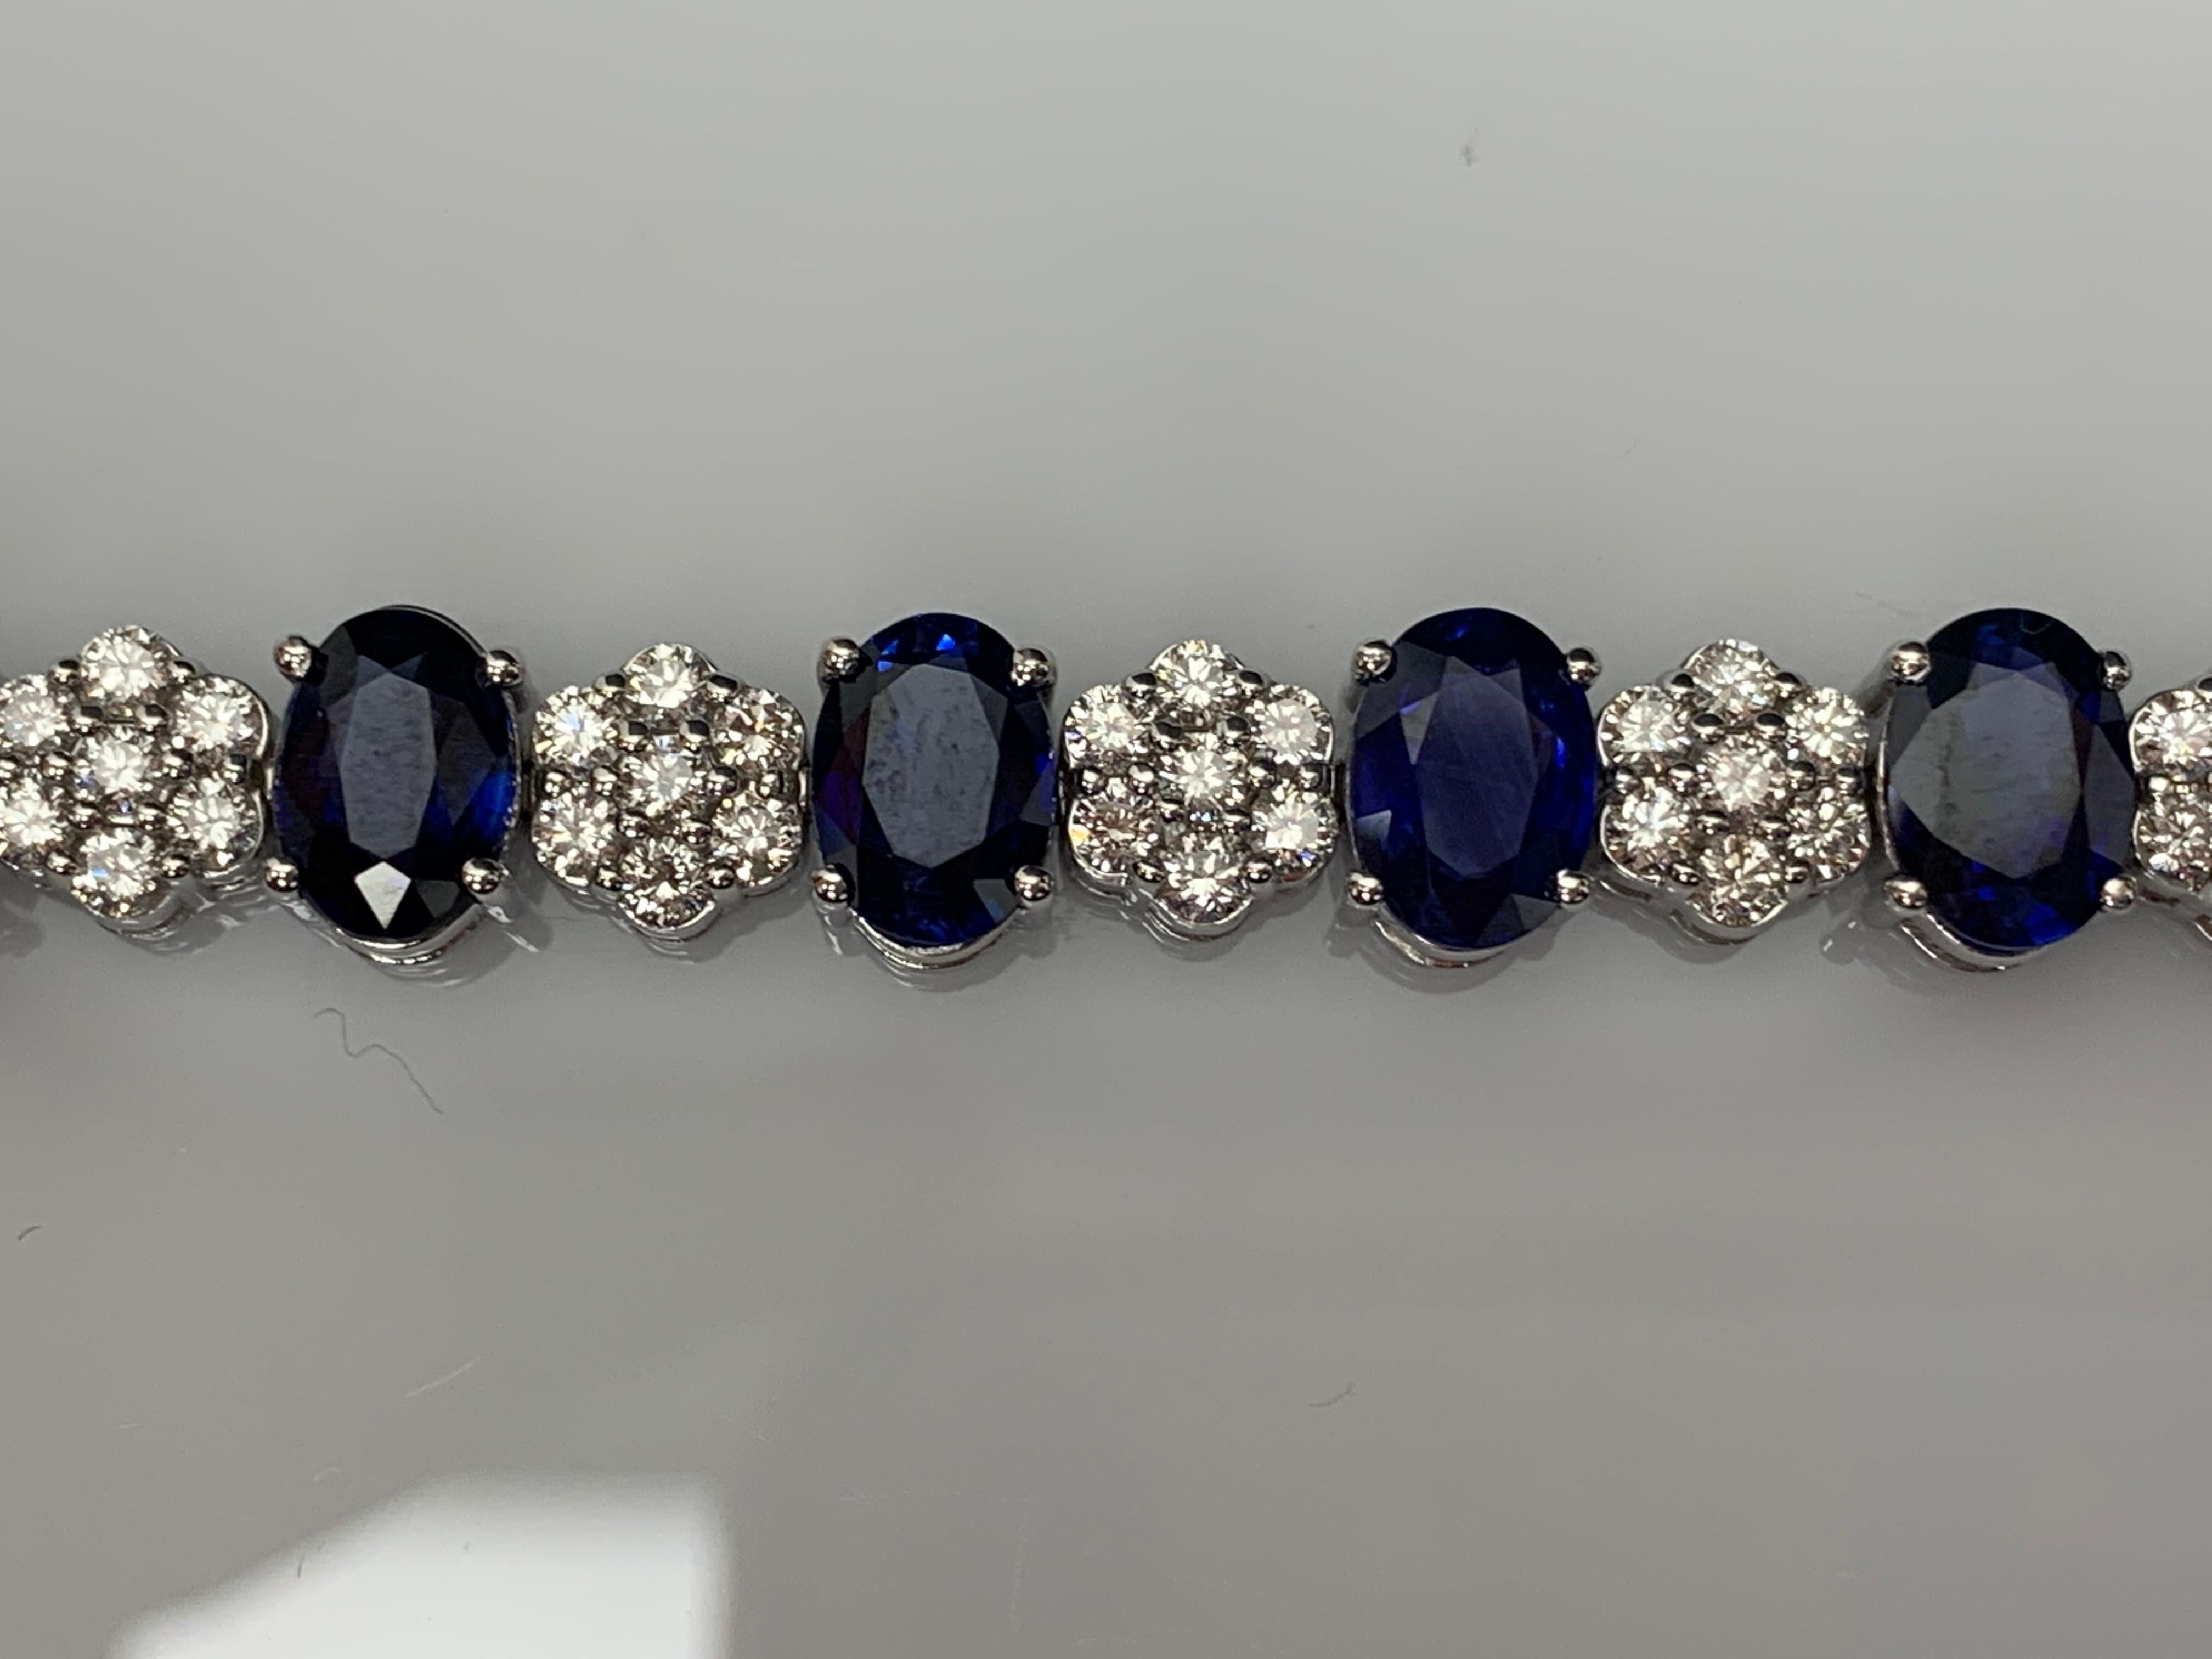 15.26 Carat Oval Cut Blue Sapphire and Diamond Tennis Bracelet in 14K White Gold For Sale 11